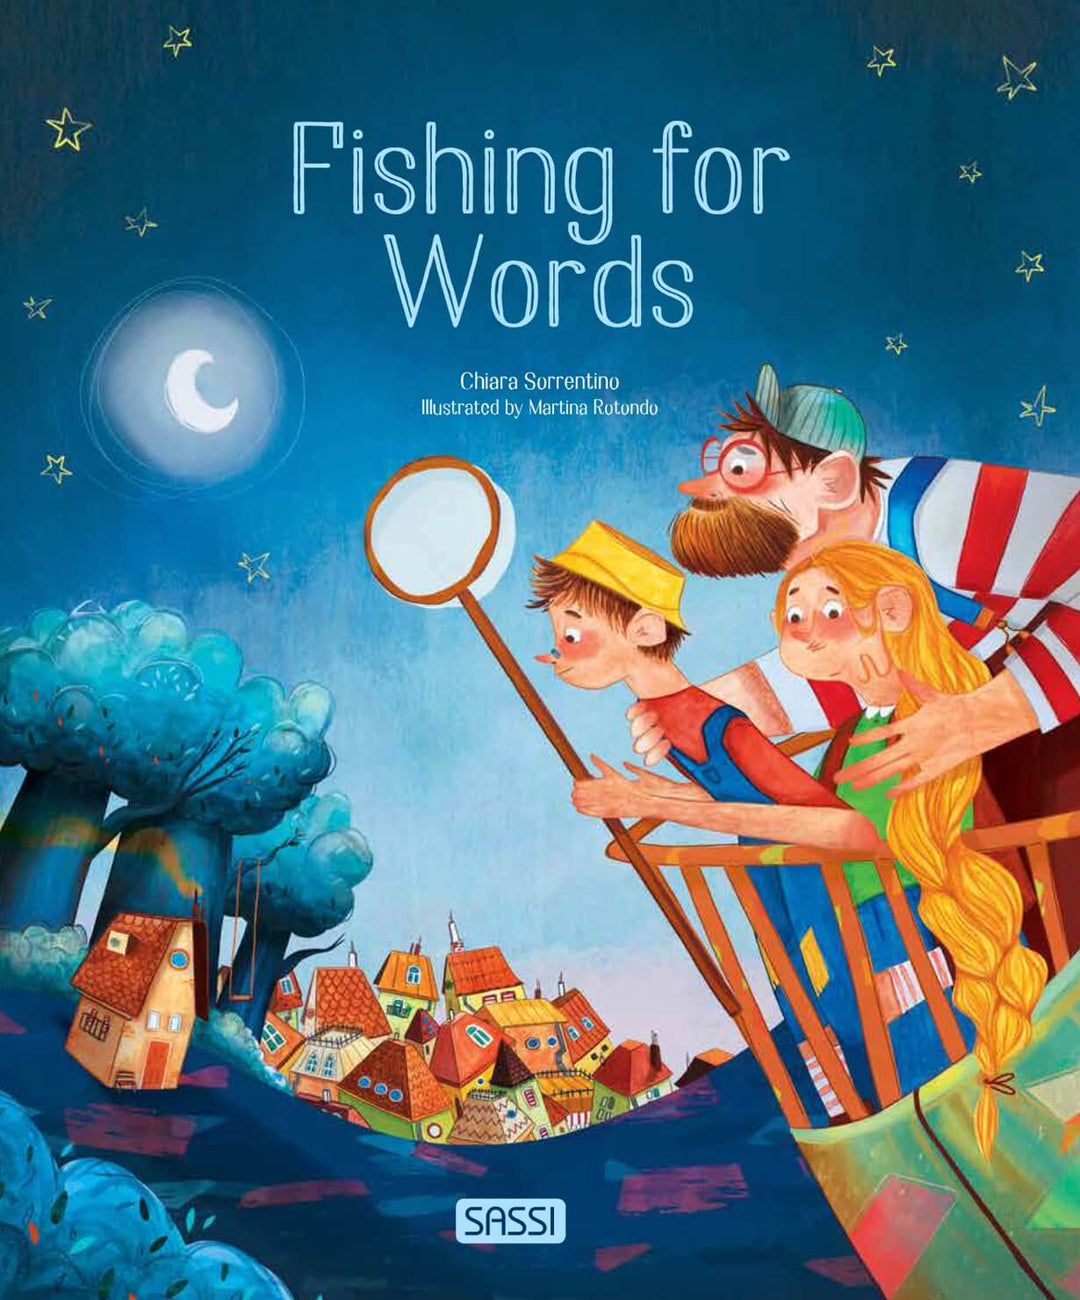 Sassi Story Book - Fishing for Words